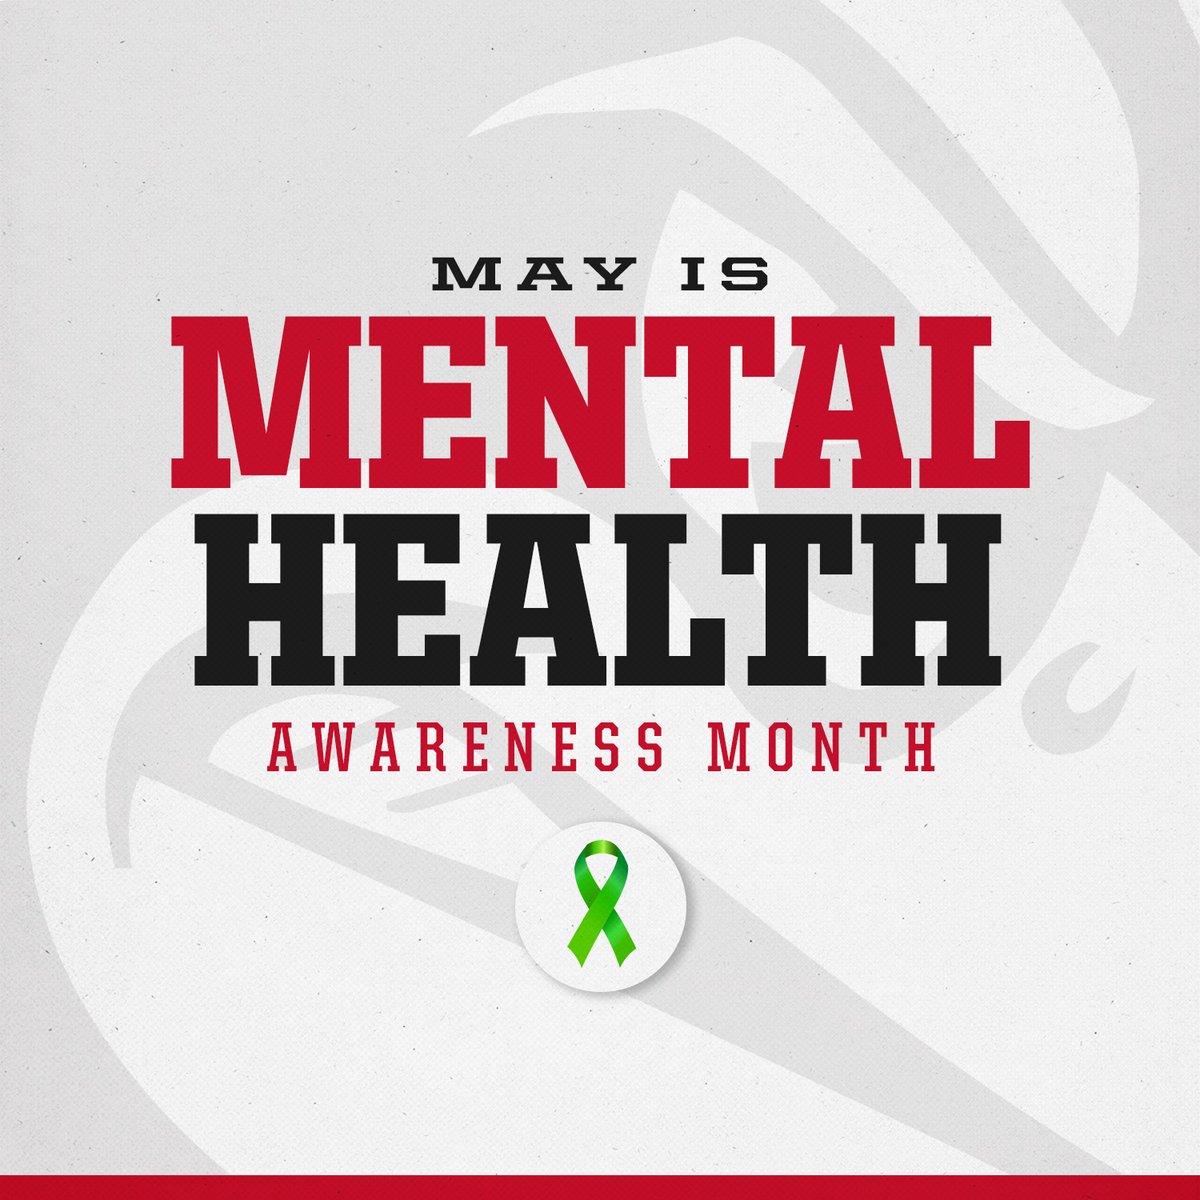 Mental health matters💚

Redbird Athletics encourages all fans & student-athletes to participate in the #3for3 Challenge with @HilinskisHope to raise awareness for mental health.
💚 Do 3 of anything
💚 Share why mental health matters to you
💚 Challenge 3 others to speak out